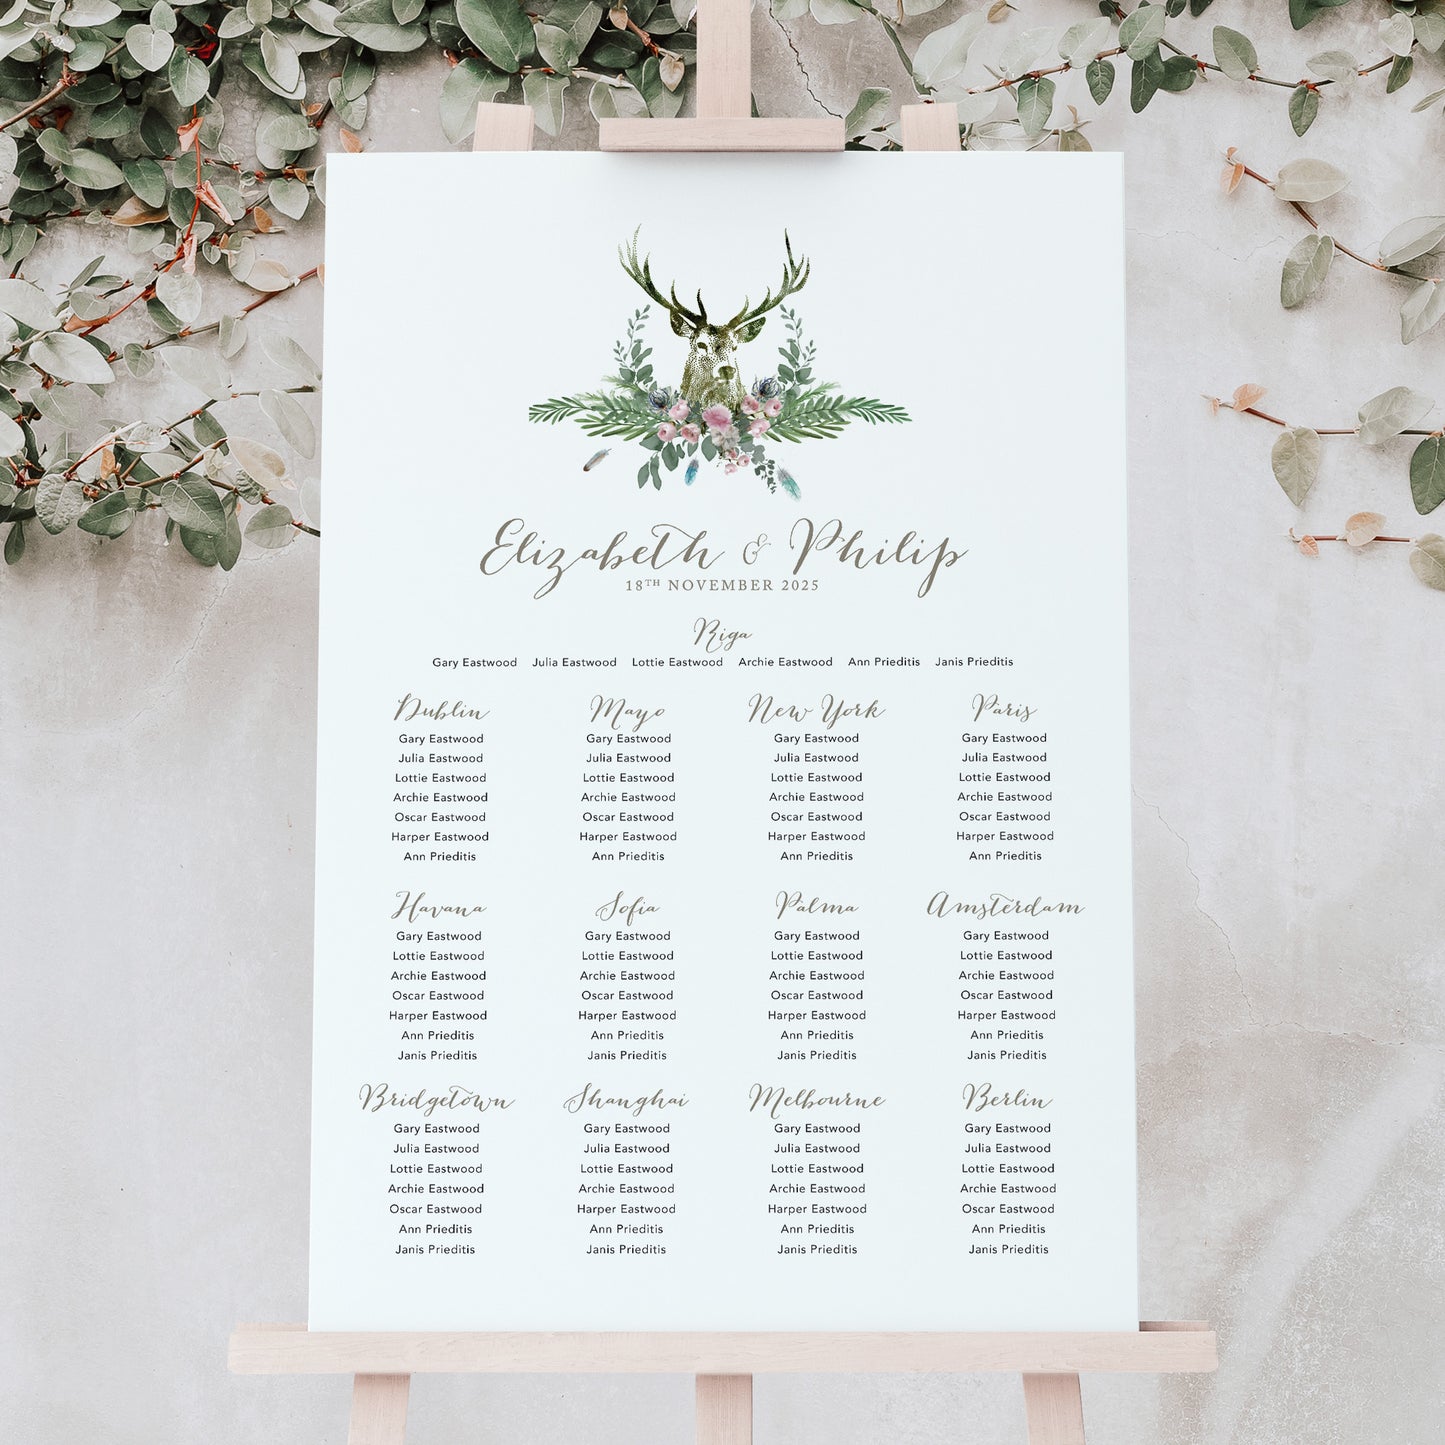 Table plan for a scottish wedding